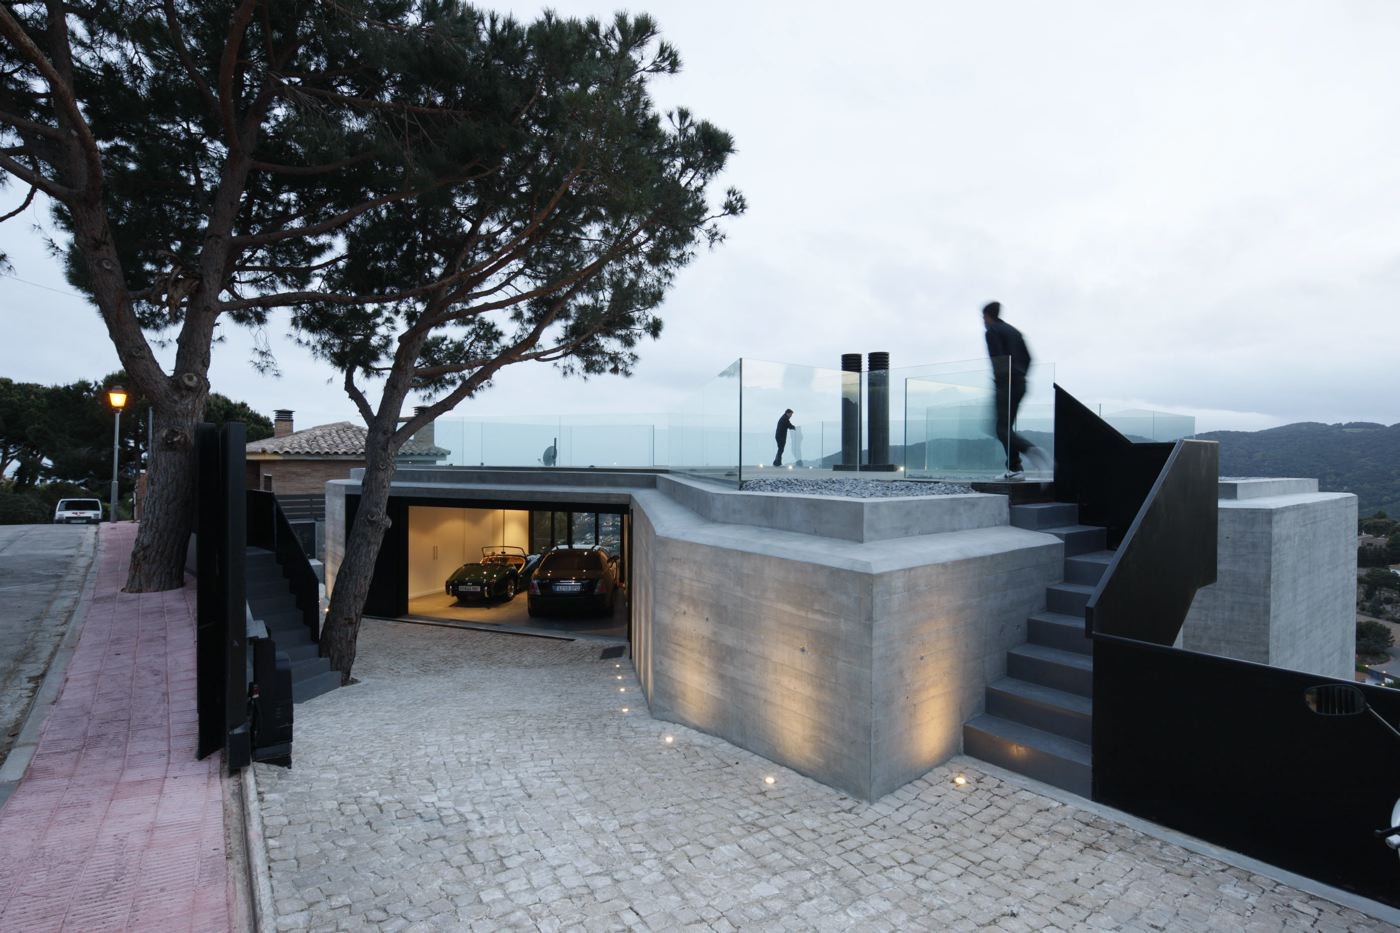 Exterior shot of Cadaval & Solá Morales' "X House" in Cabrils, Spain.